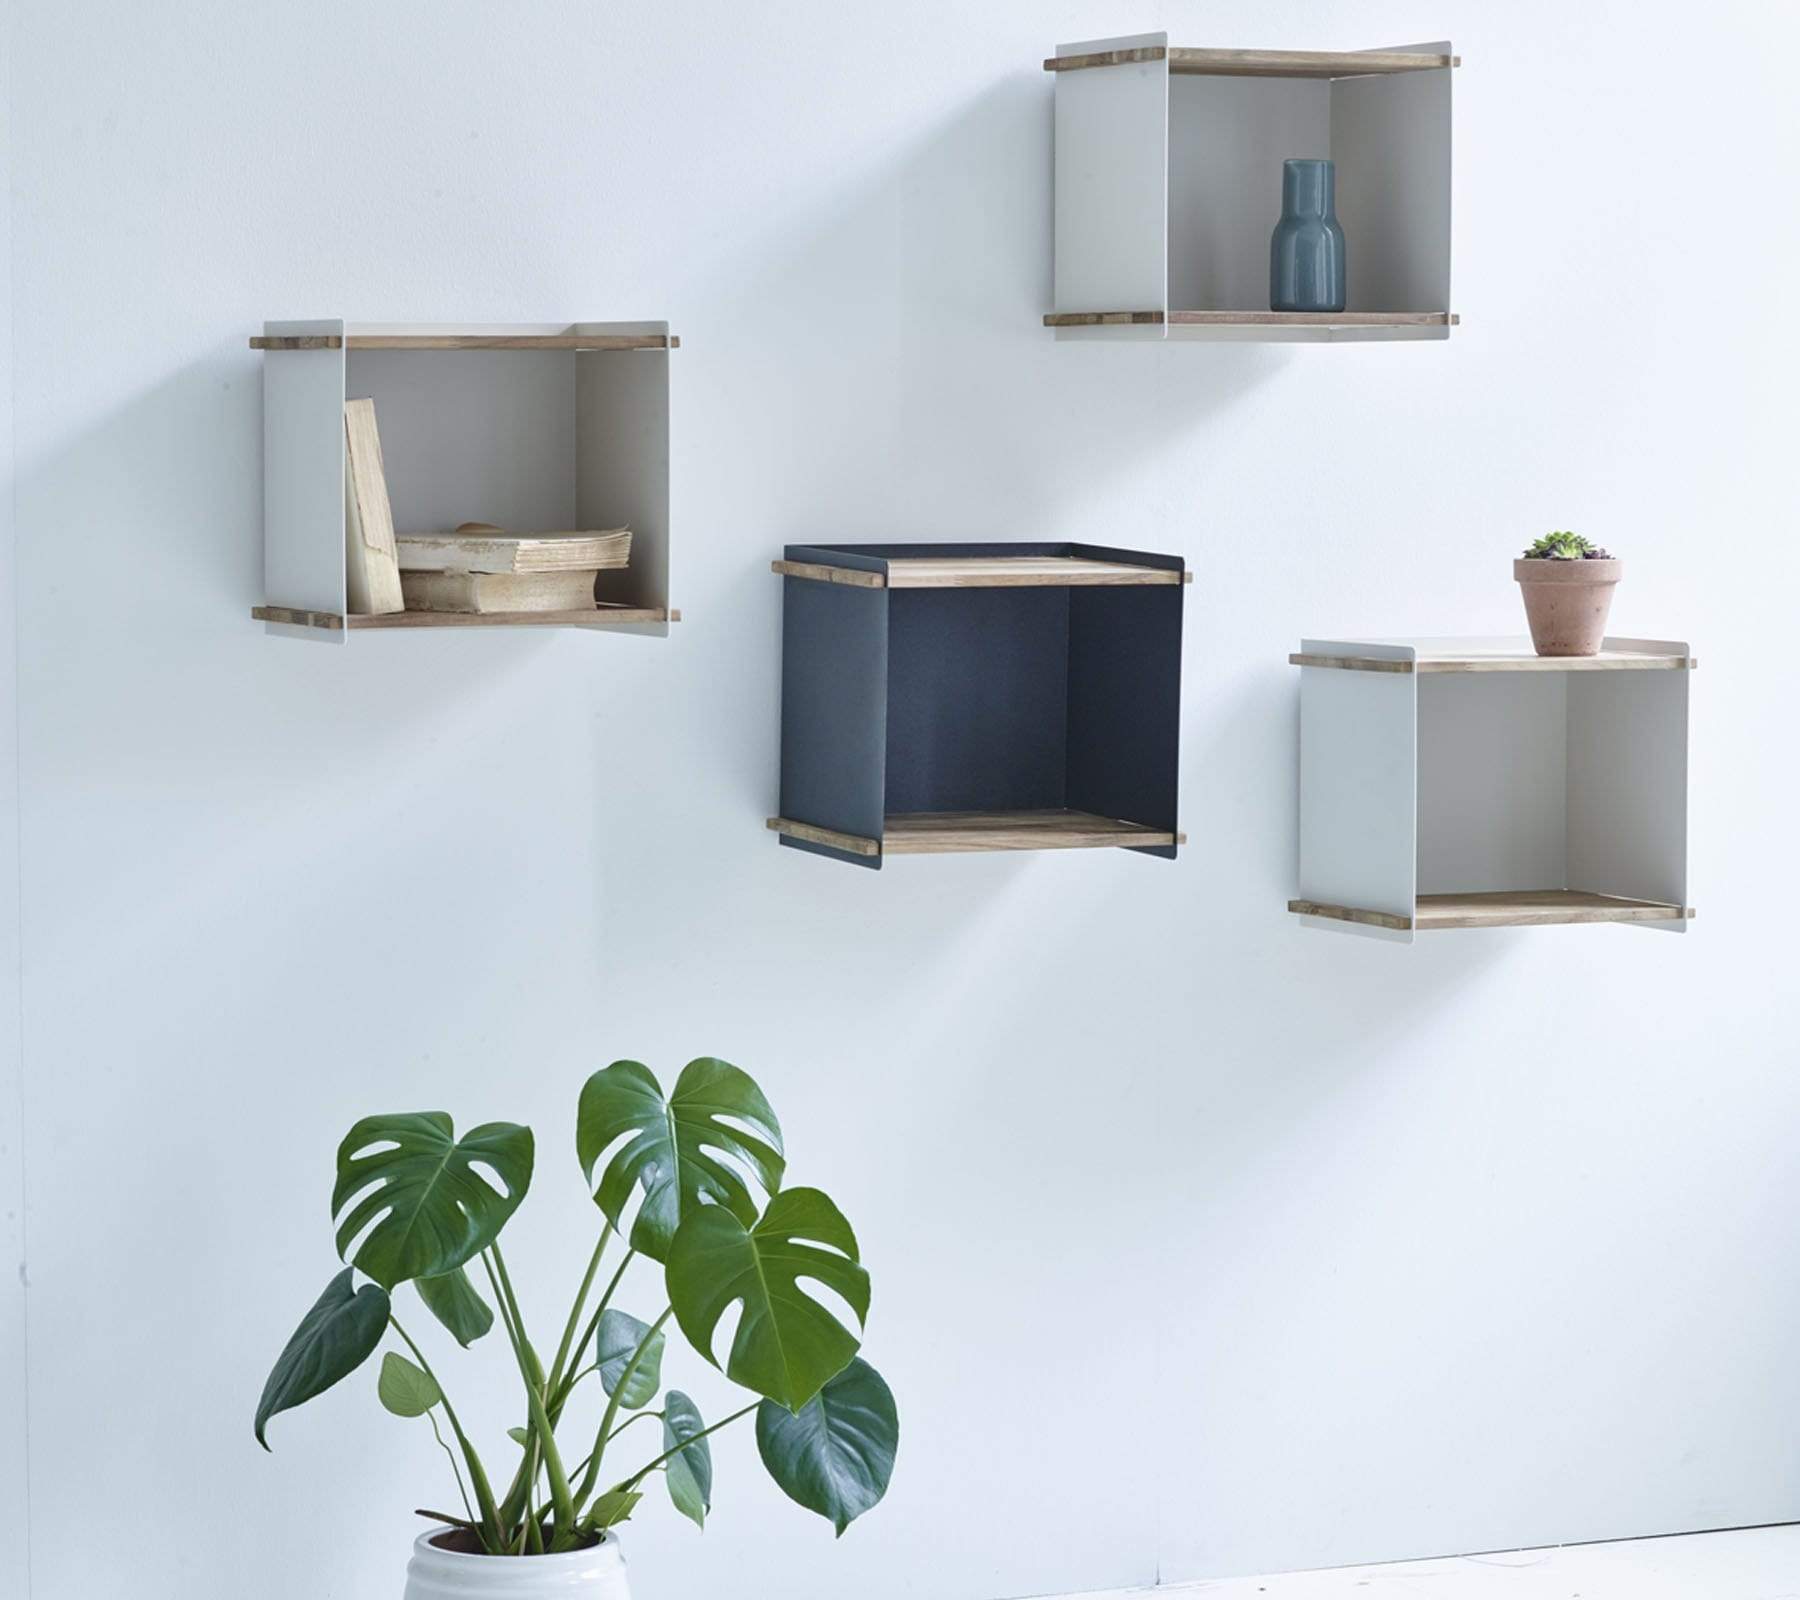  Boxhill's blue / white Wall-mounted Teak Wood Square Shelves mounted on white wall and plants in a white planter